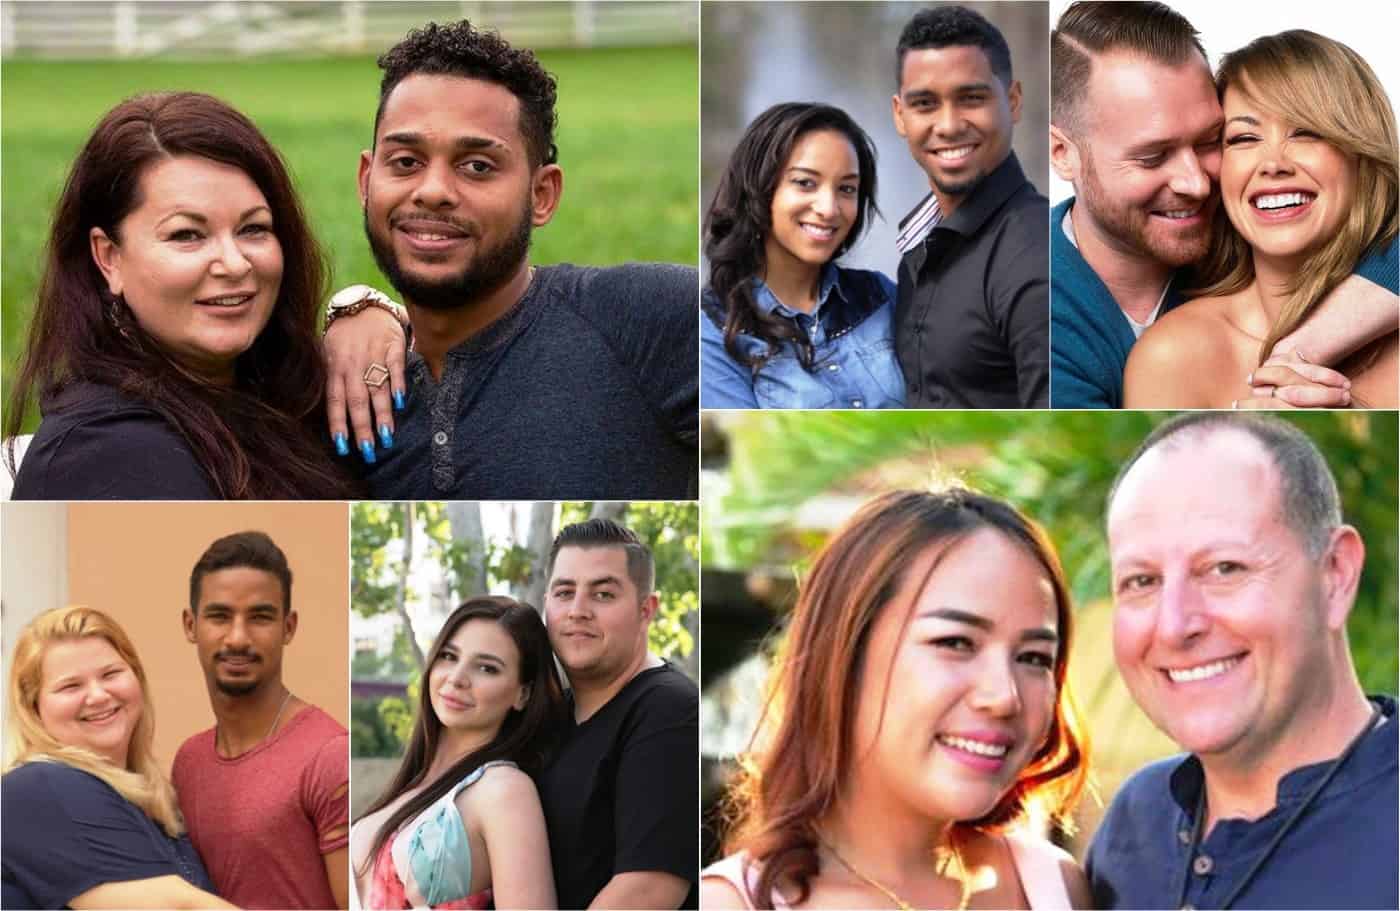 90 day fiance before the 90 days season 2 episode 2